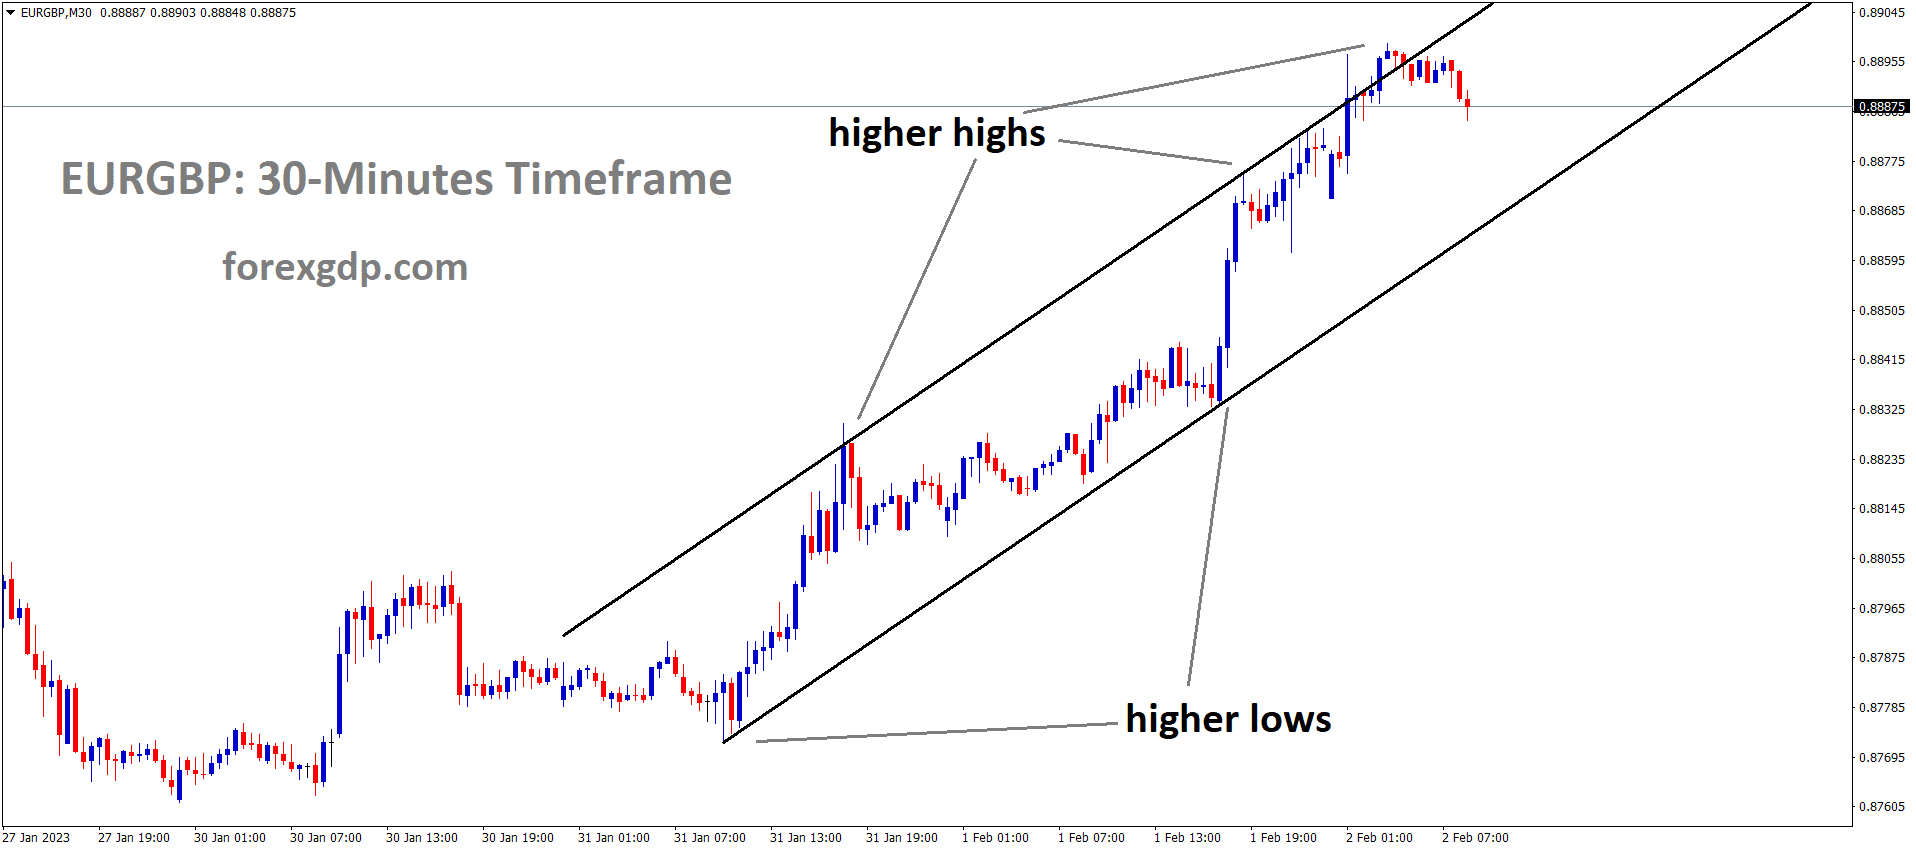 EURGBP M30 TF analysis Market is moving in an Ascending channel and the market has fallen from the higher high area of the channel